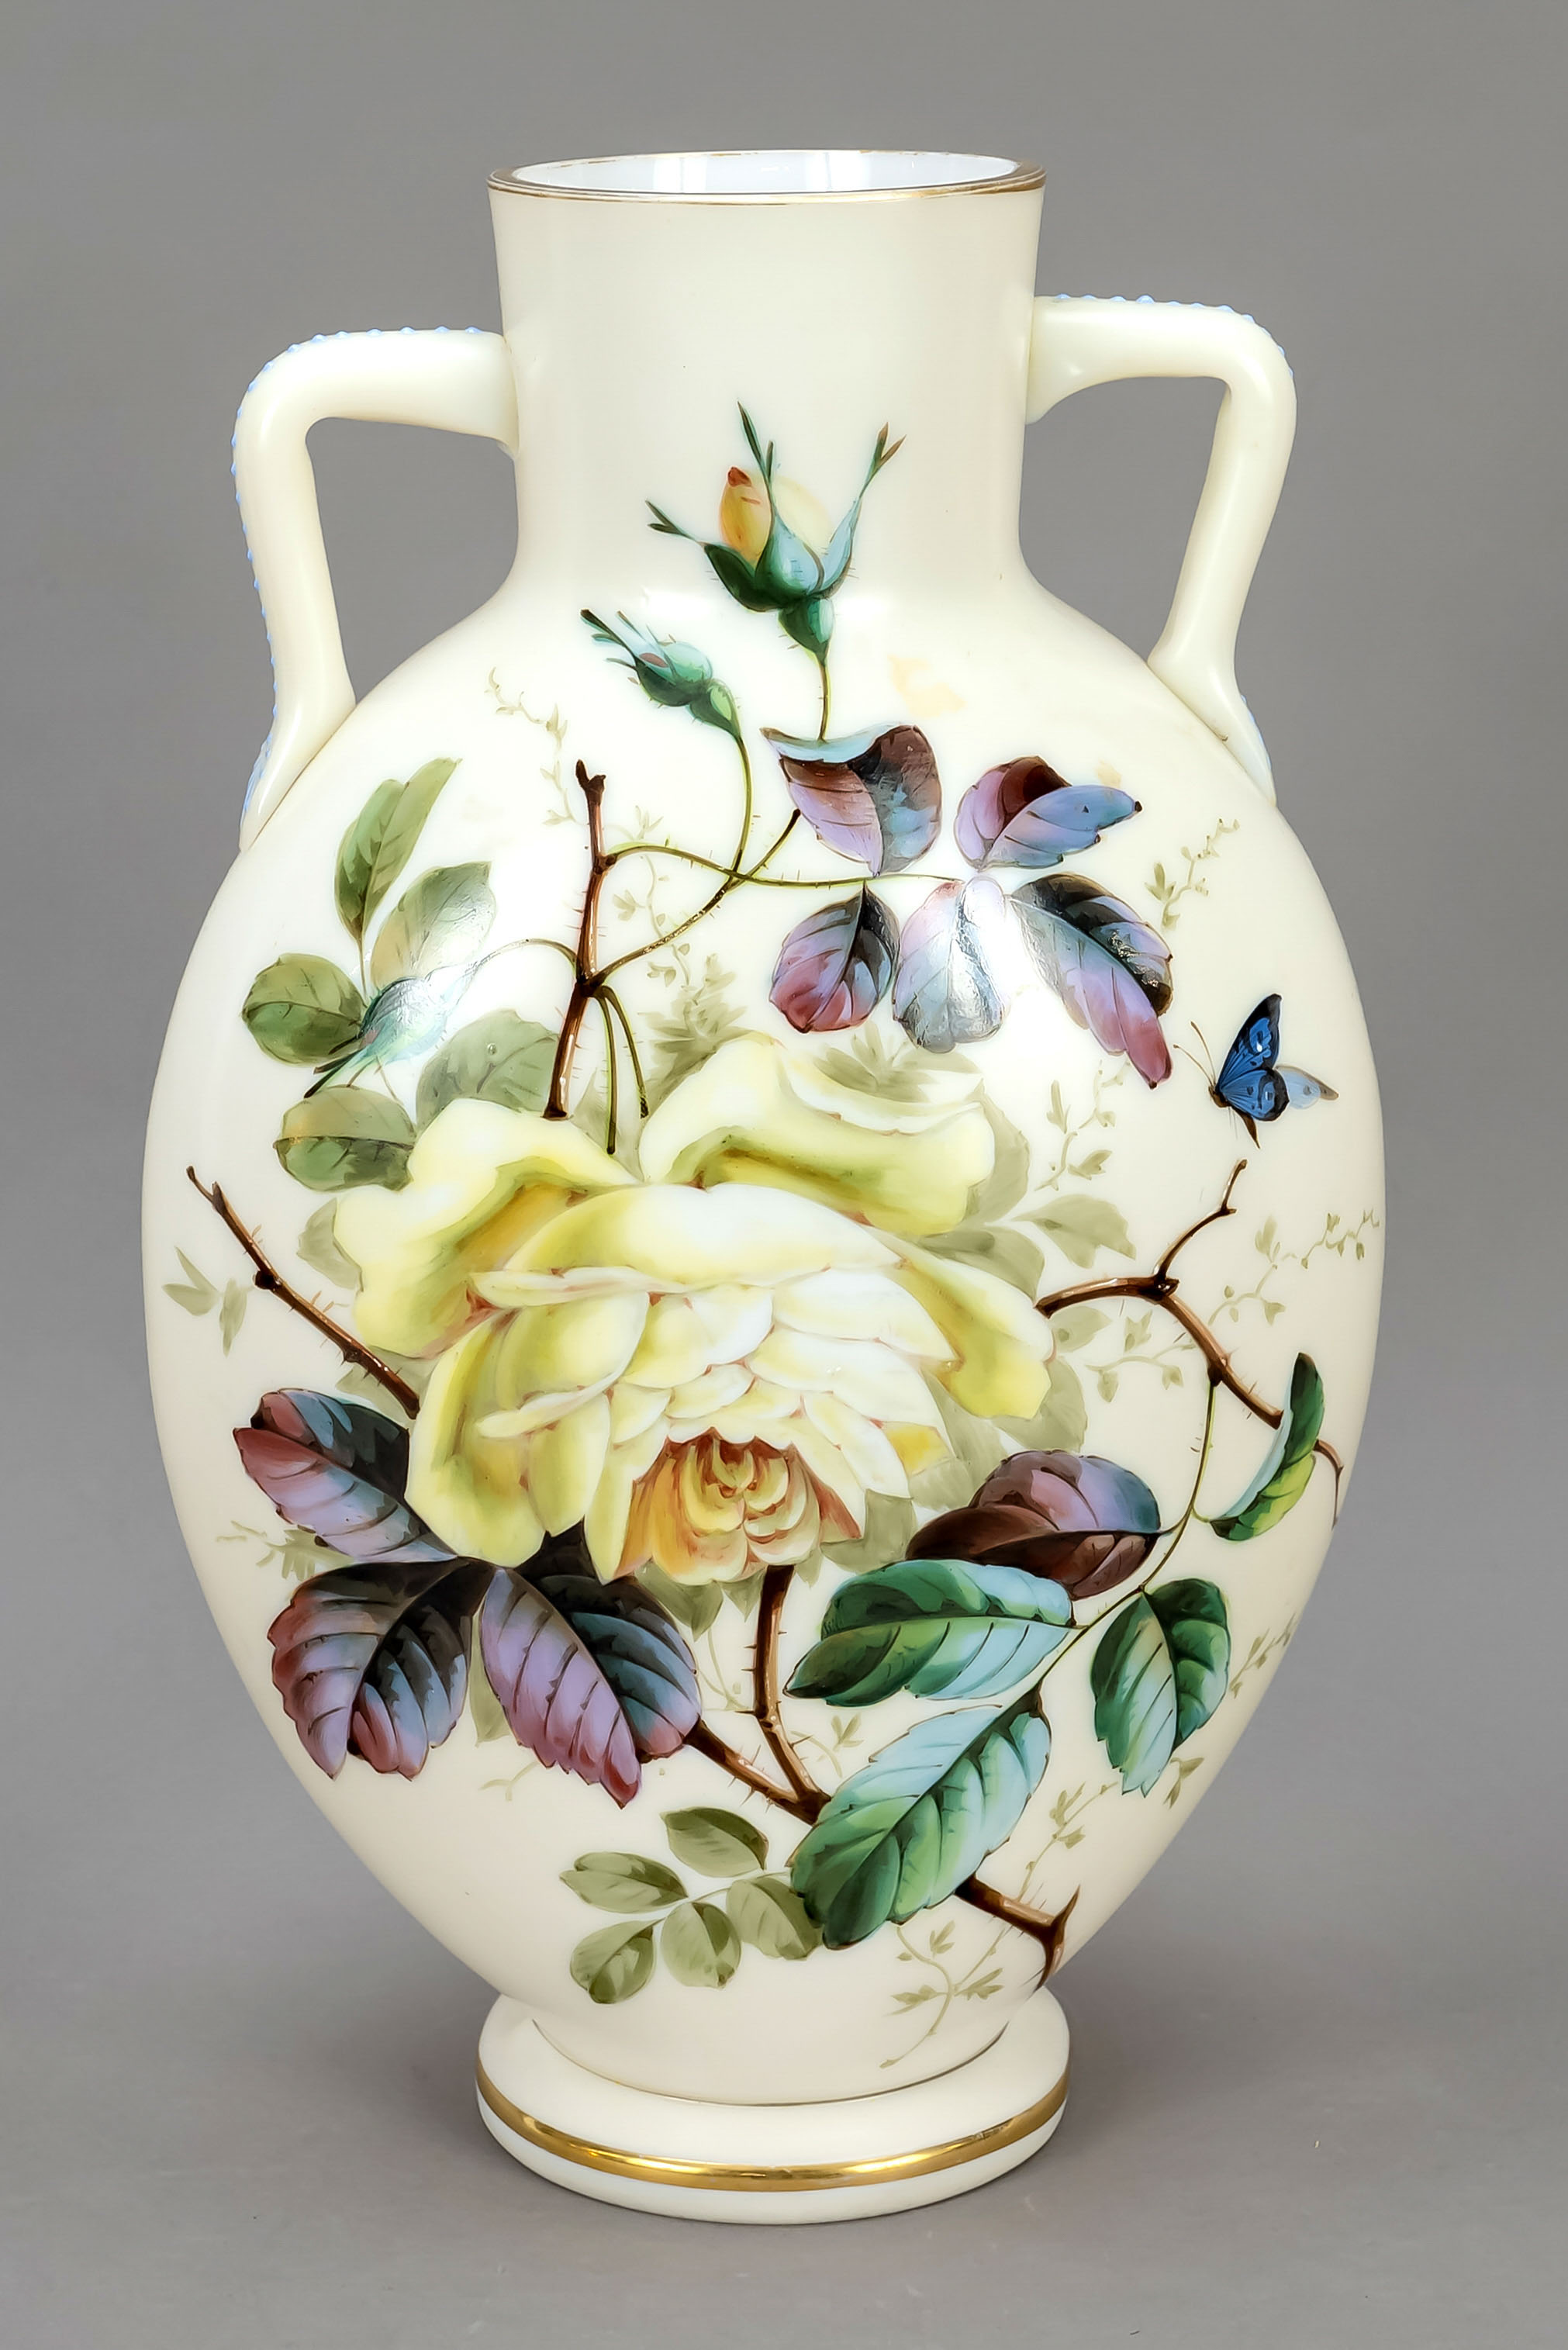 Vase, c. 1900, round stand, flat oval body, angular handles attached to the sides, white milk